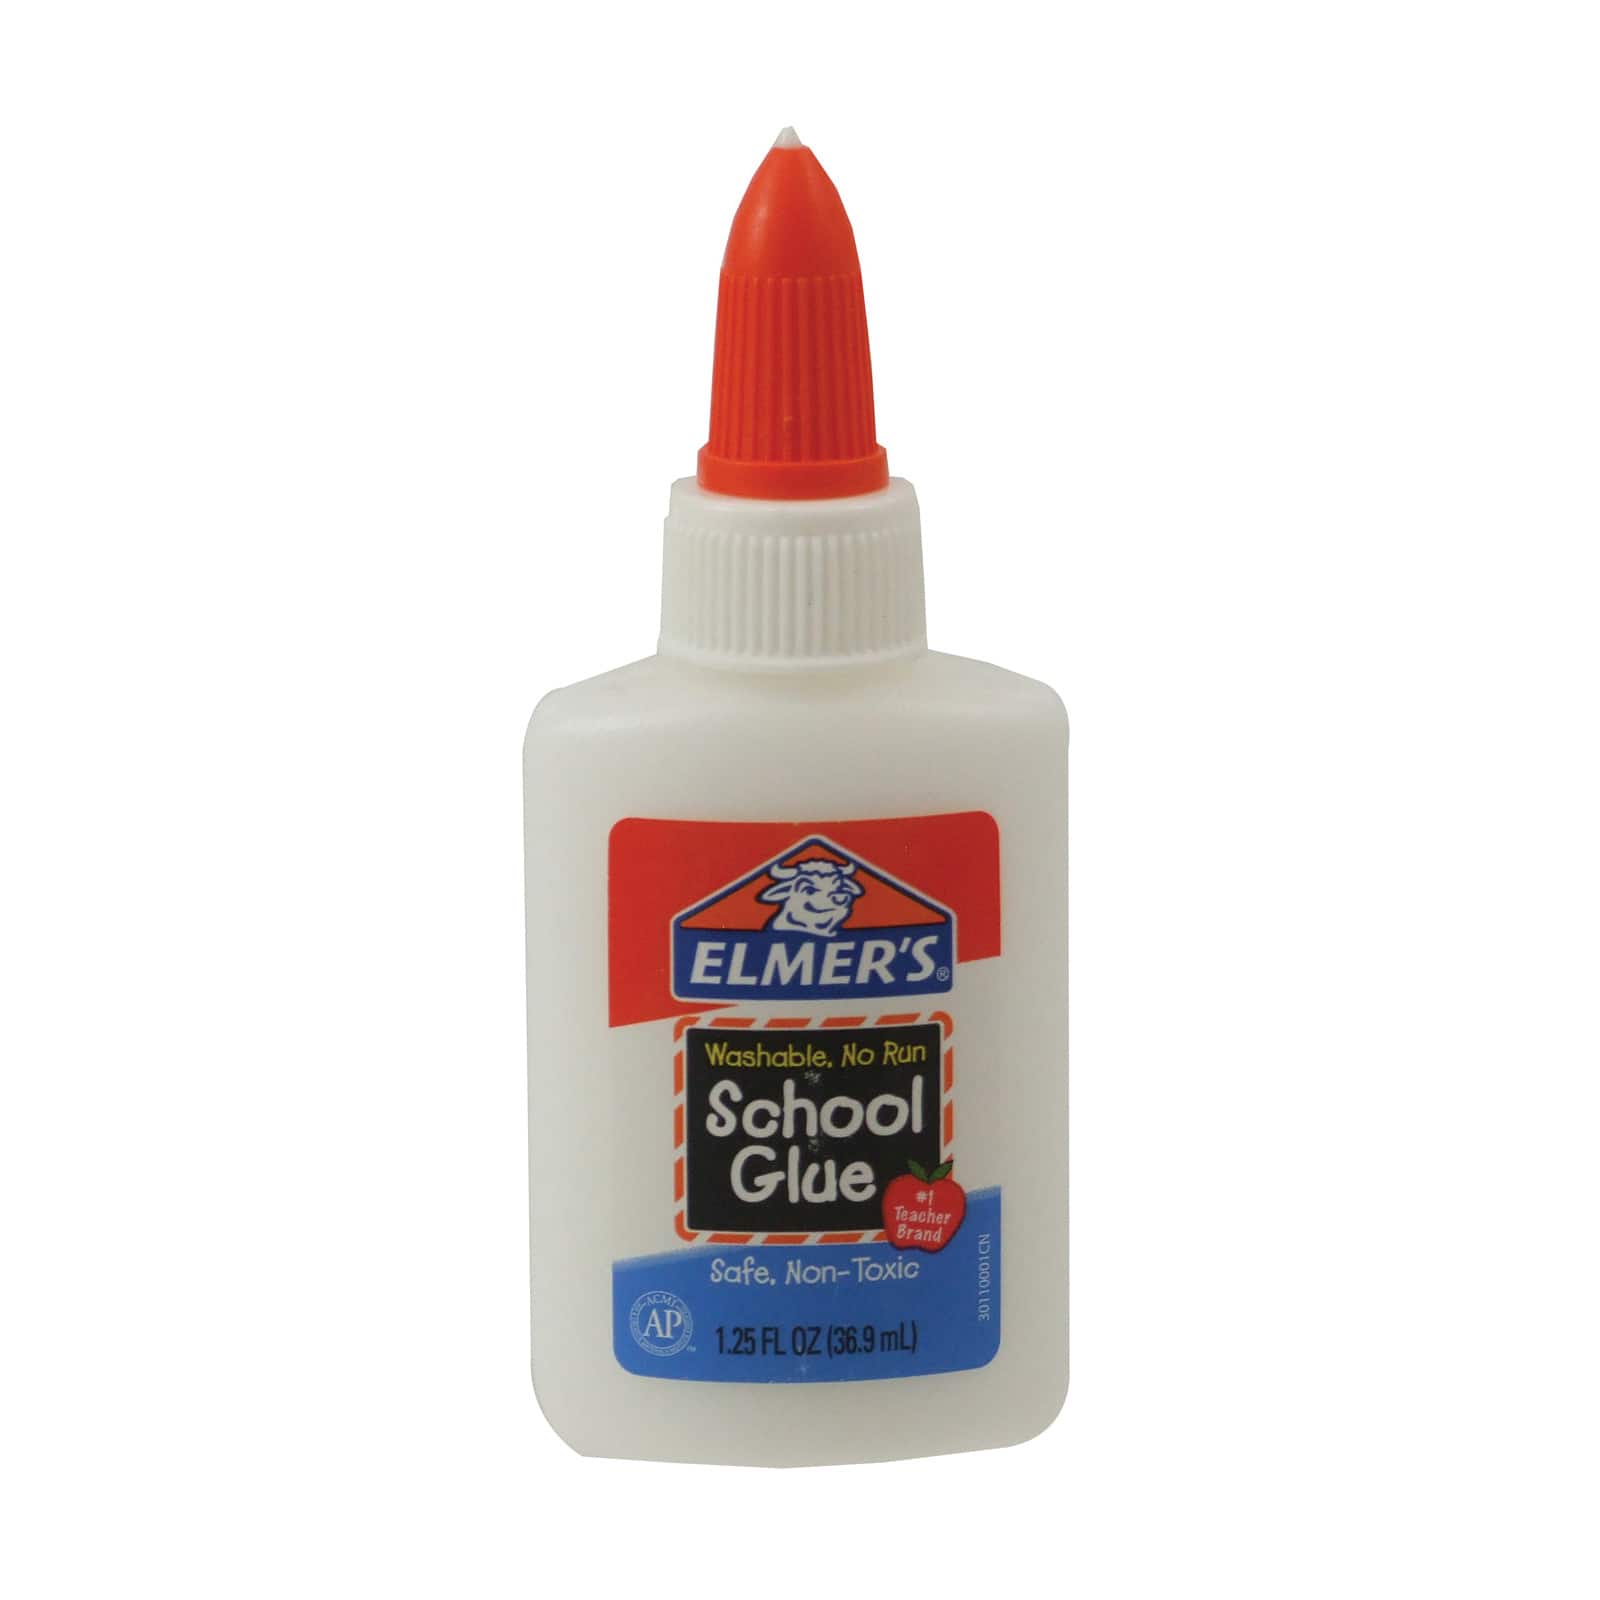 ELMERS Glue for School Washable Non Toxic 4 OZ : Toys & Games 